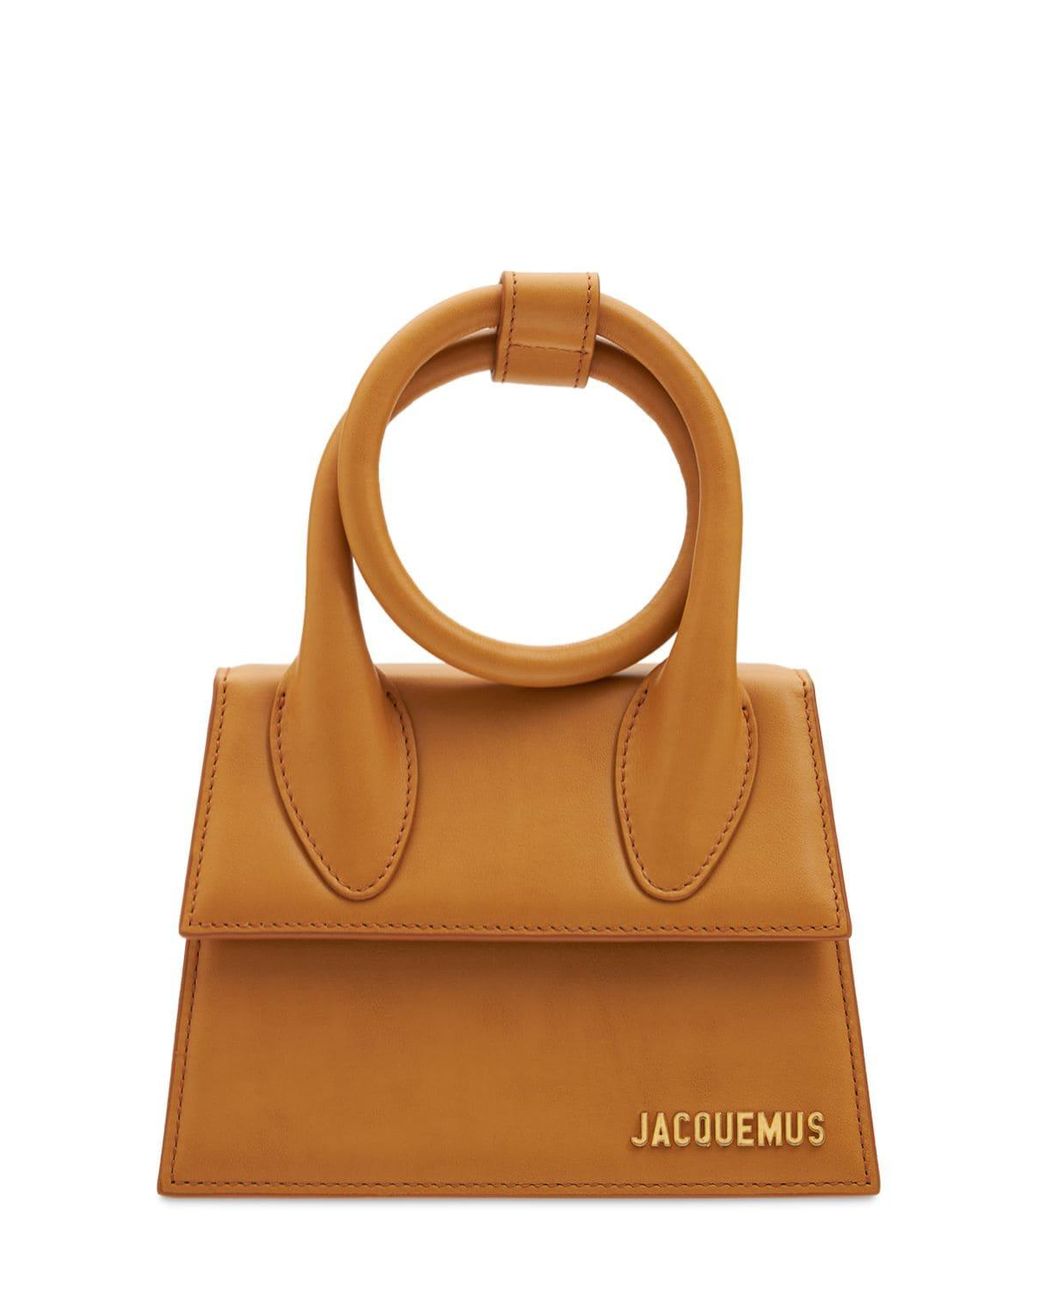 Jacquemus Le Chiquito Noeud Leather Shoulder Bag in Beige 